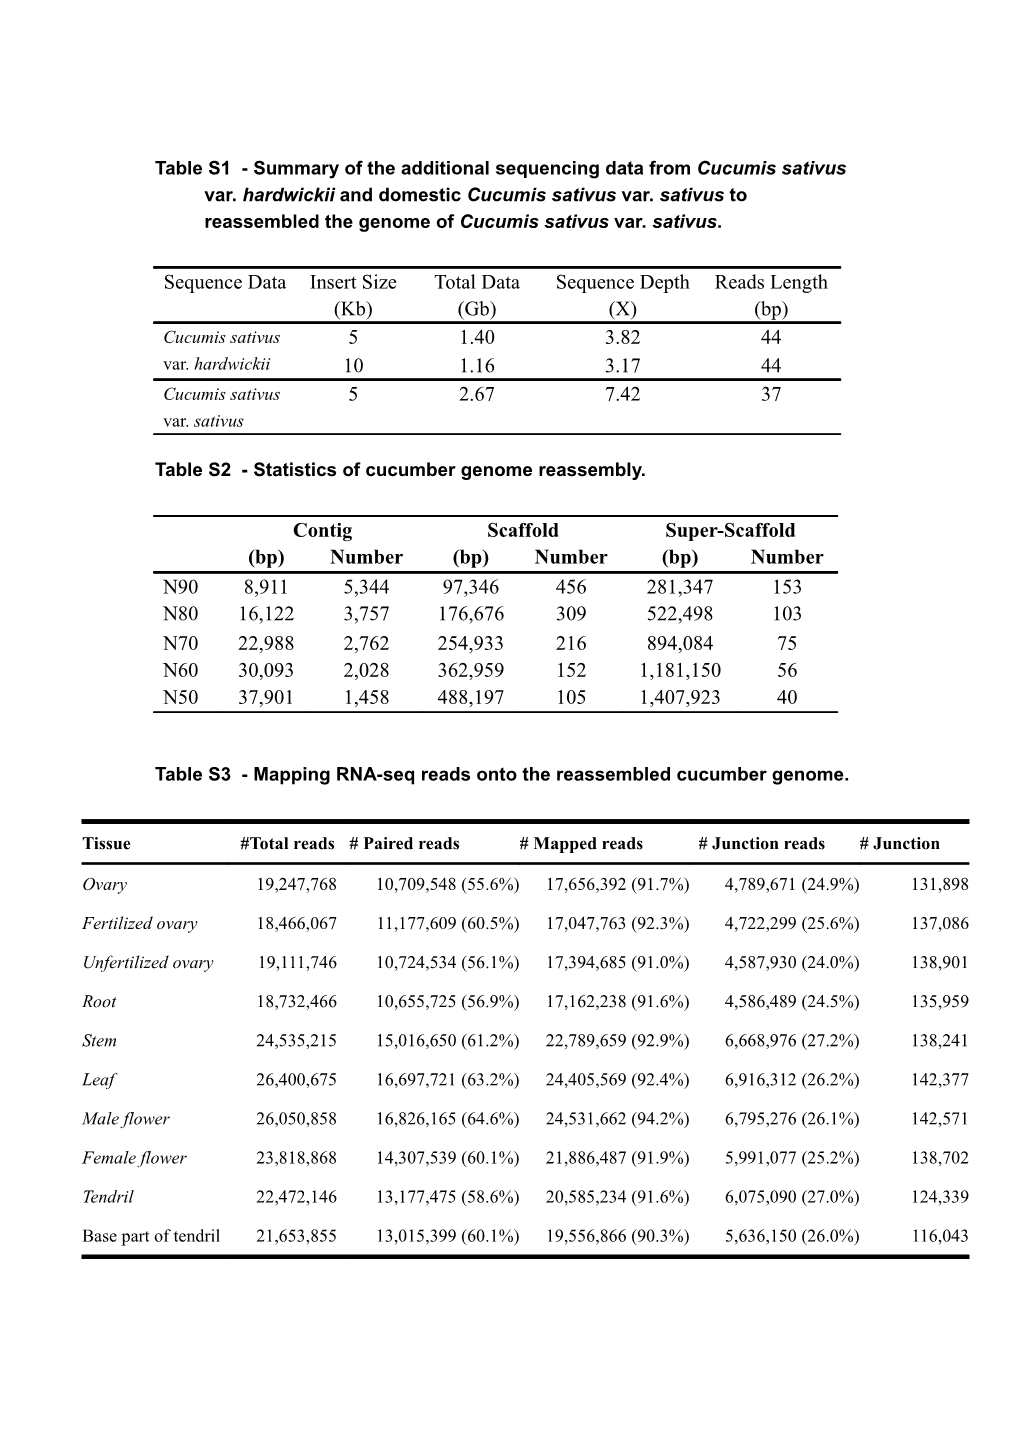 Table S2 - Statistics of Cucumber Genome Reassembly